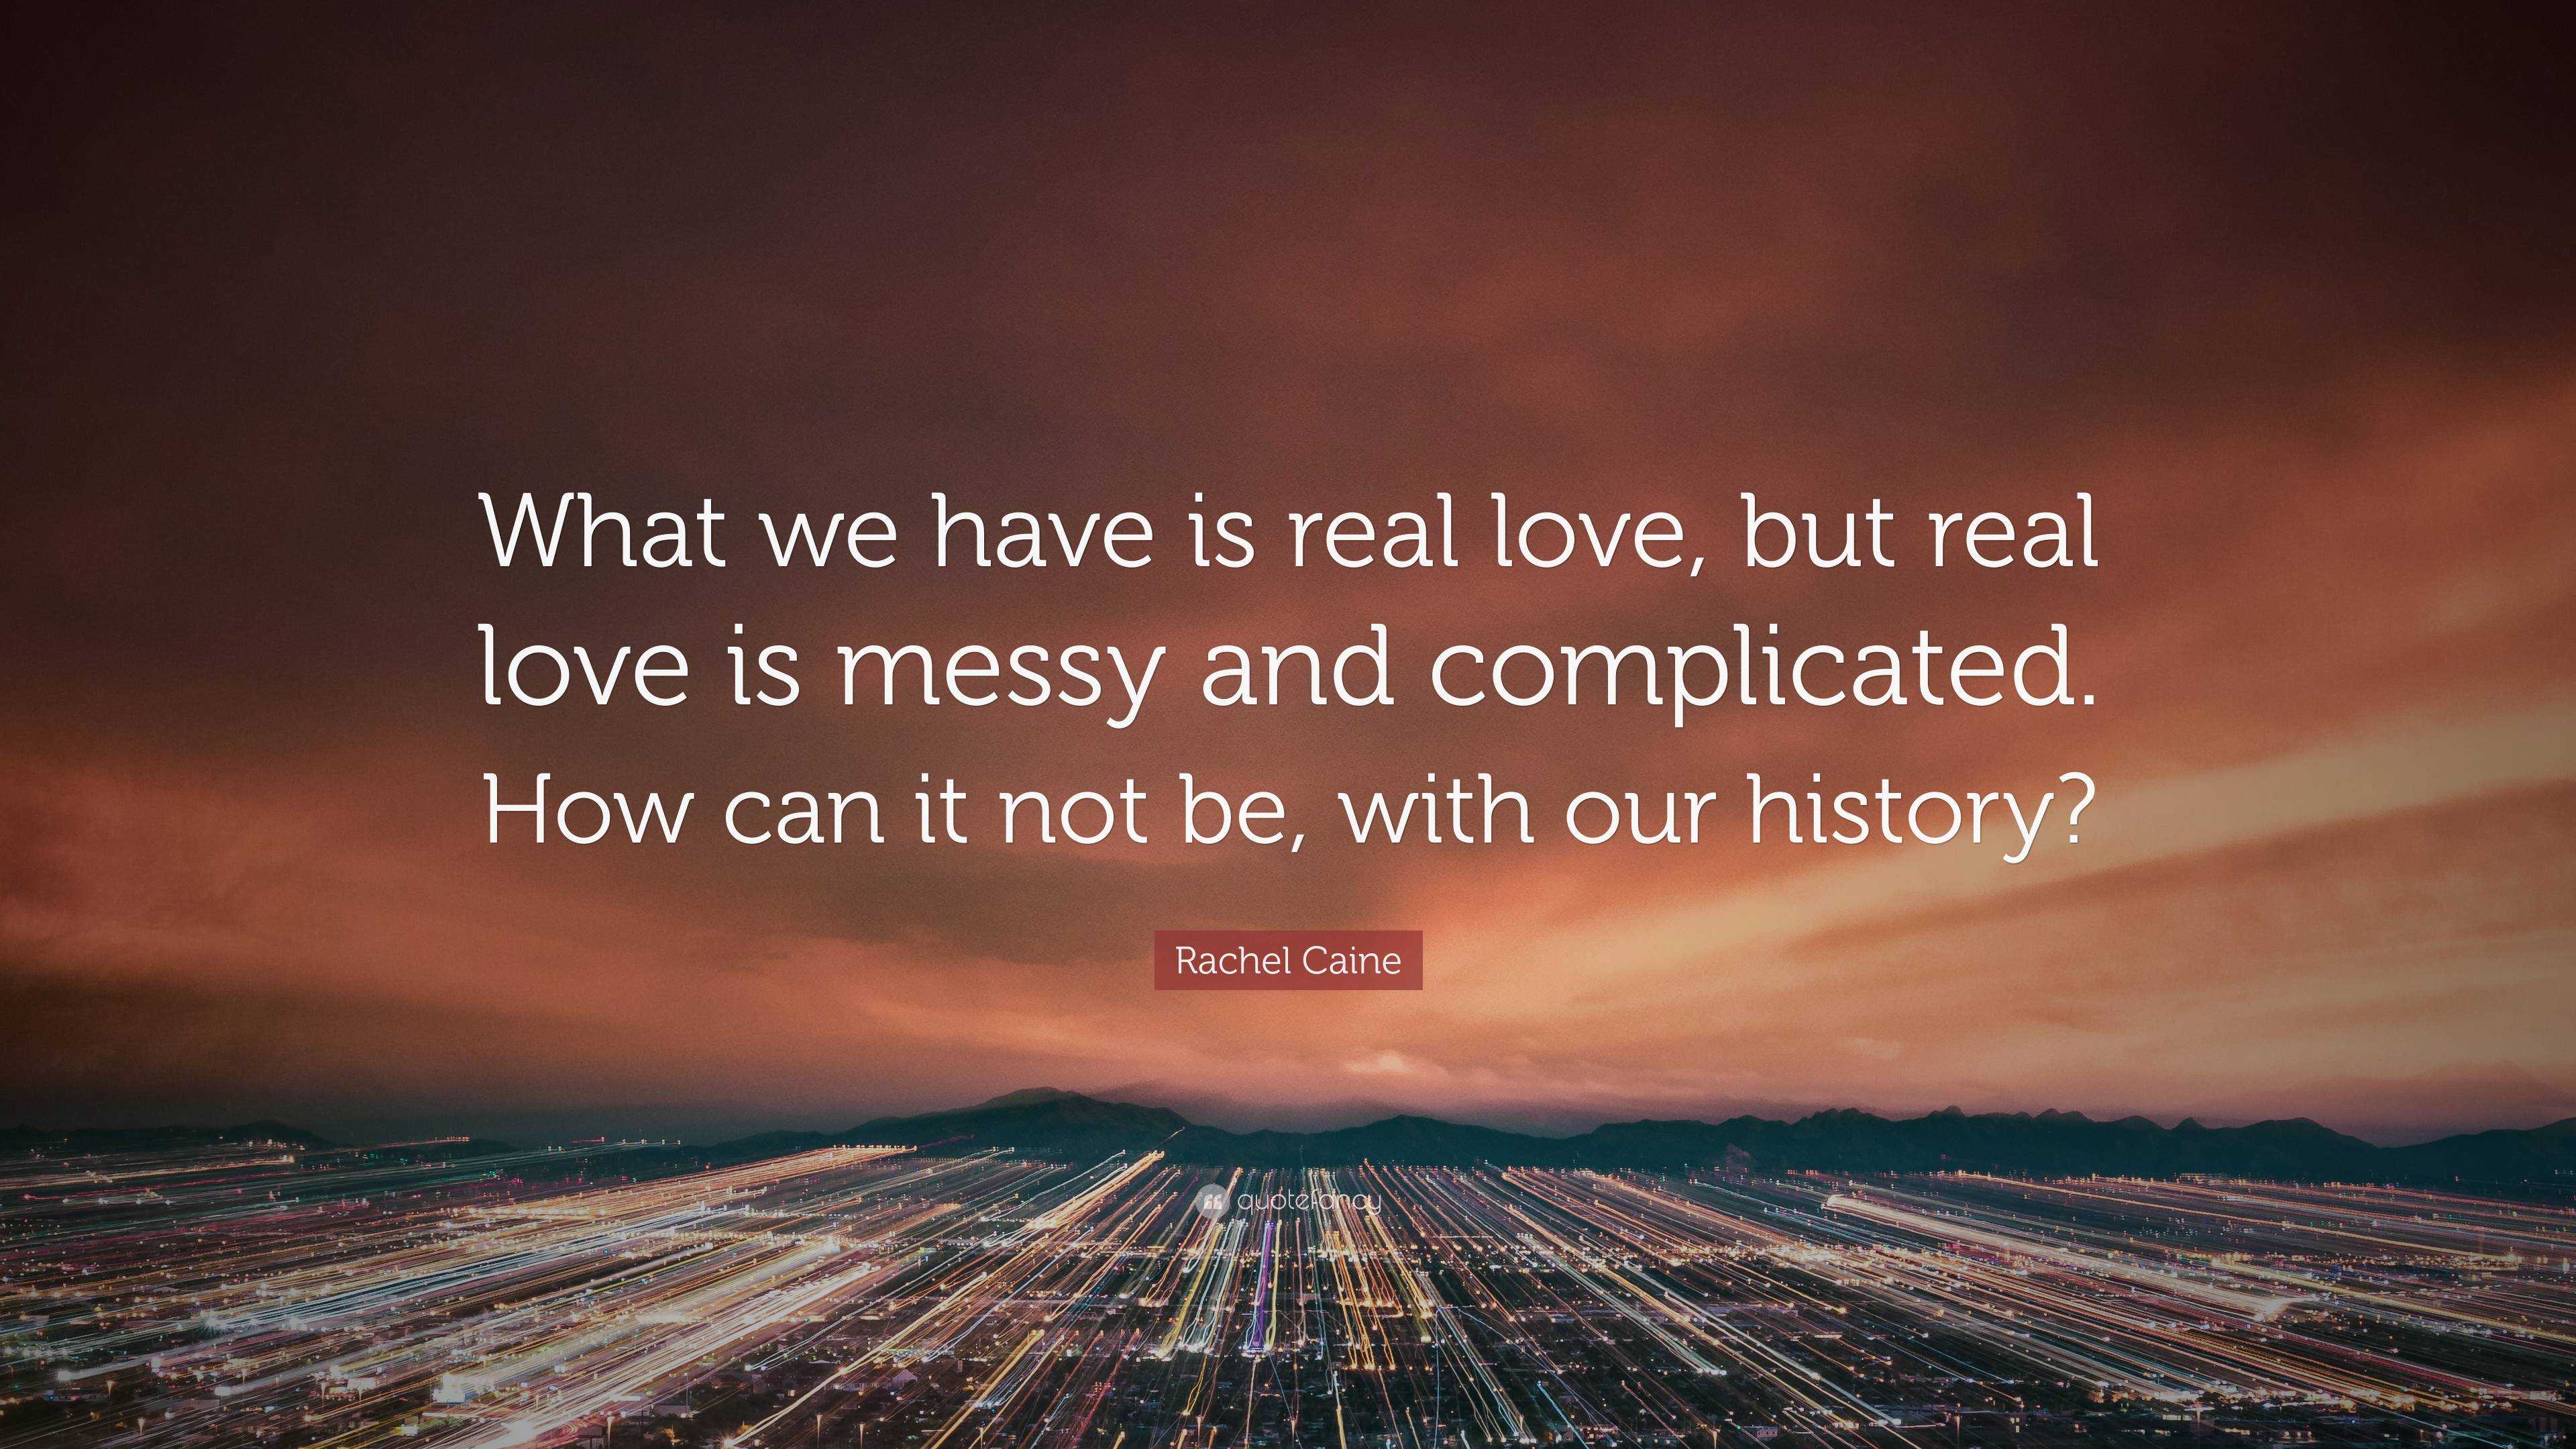 Rachel Caine Quote: “What we have is real love, but real love is